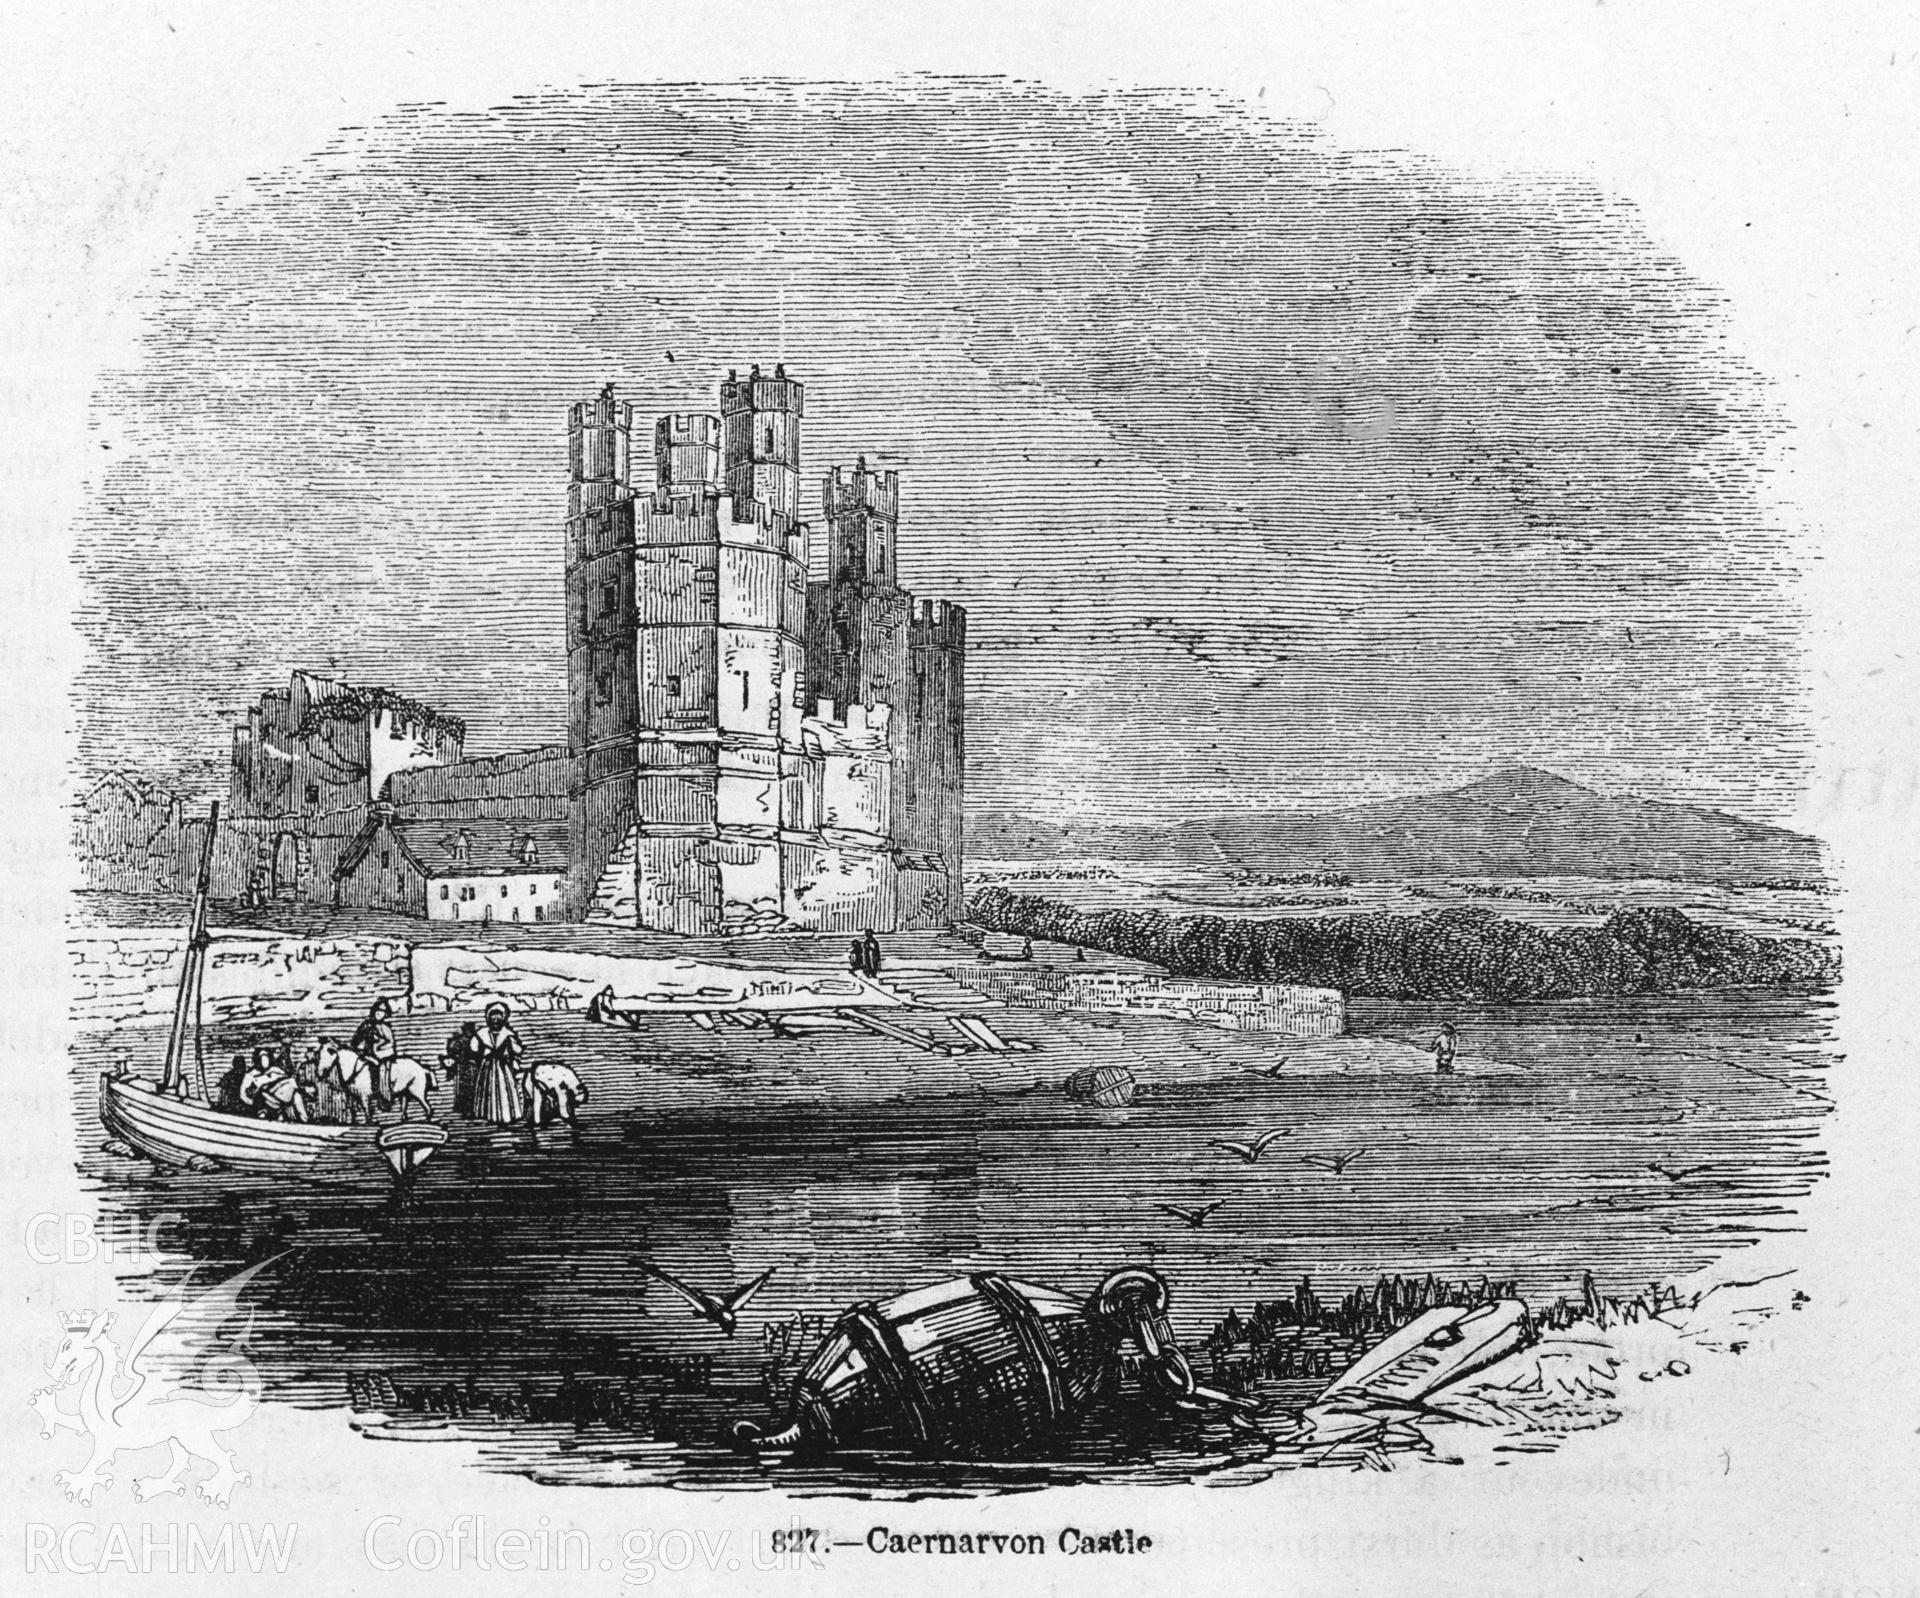 1 b/w print of engraving showing aspect of Caernarfon castle, taken from publication: 'Old England' p.208, fig. 827; collated by the former Central Office of Information.